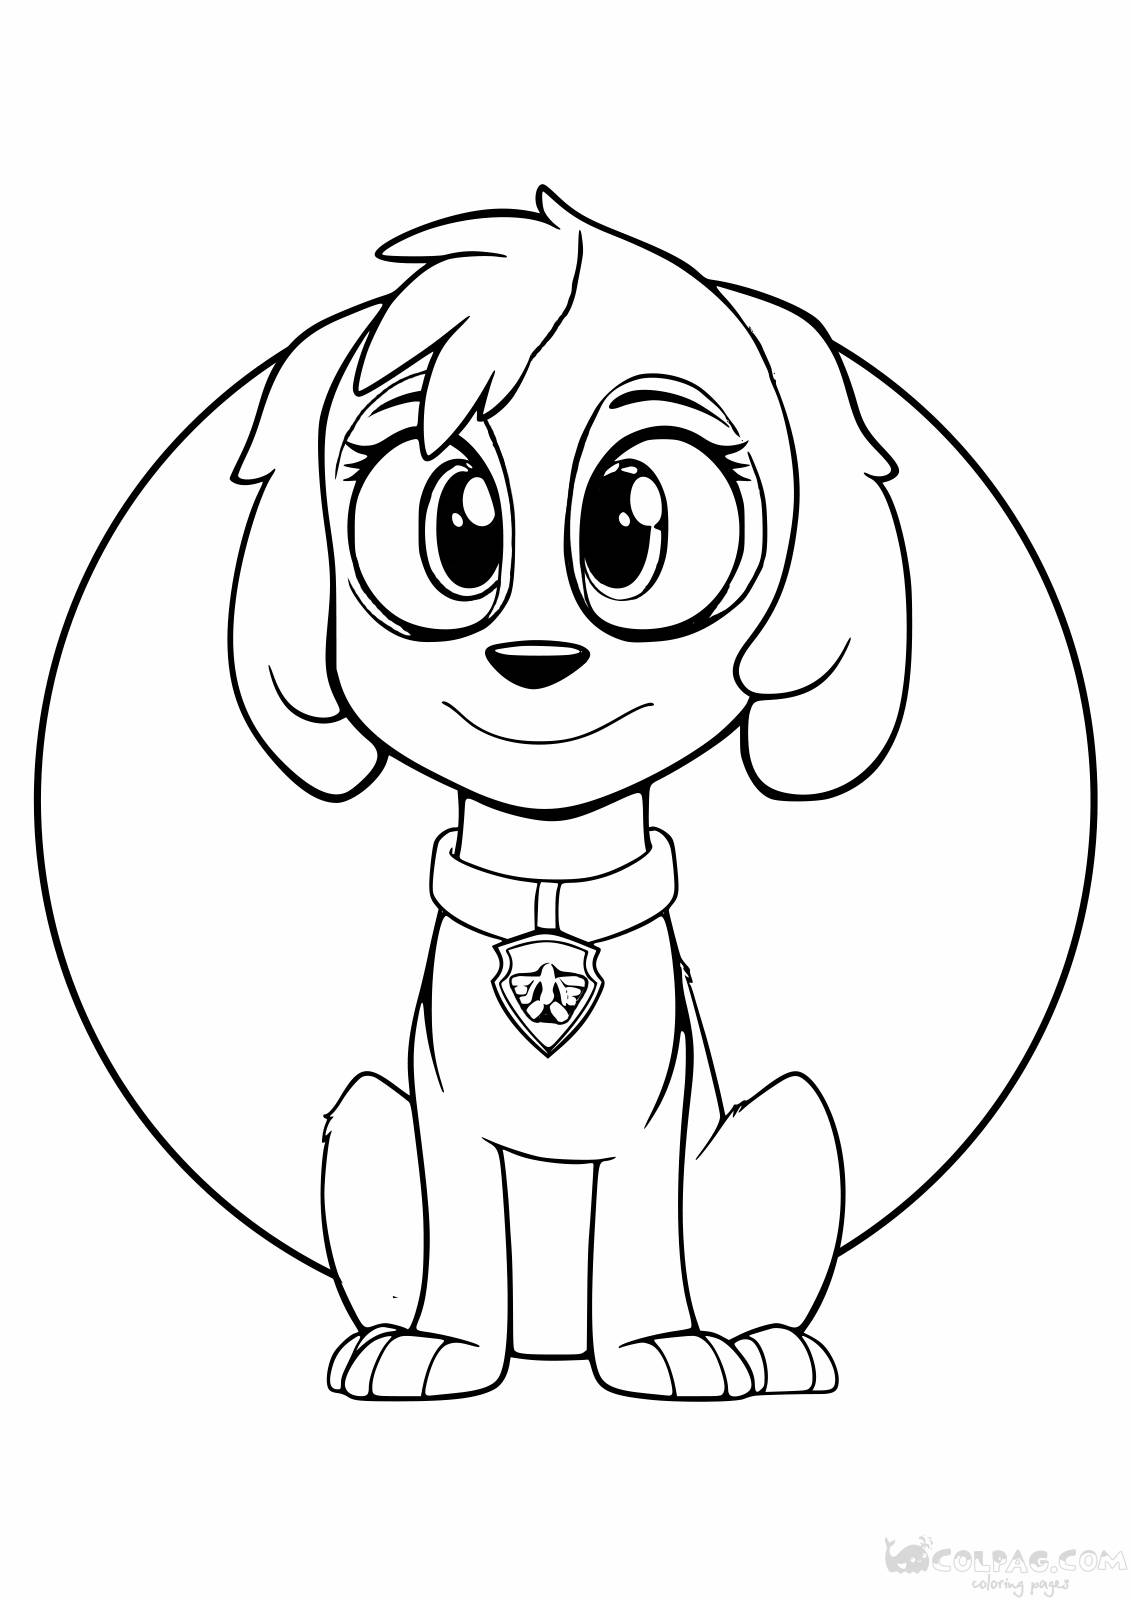 Skye Coloring Pages to Print Online